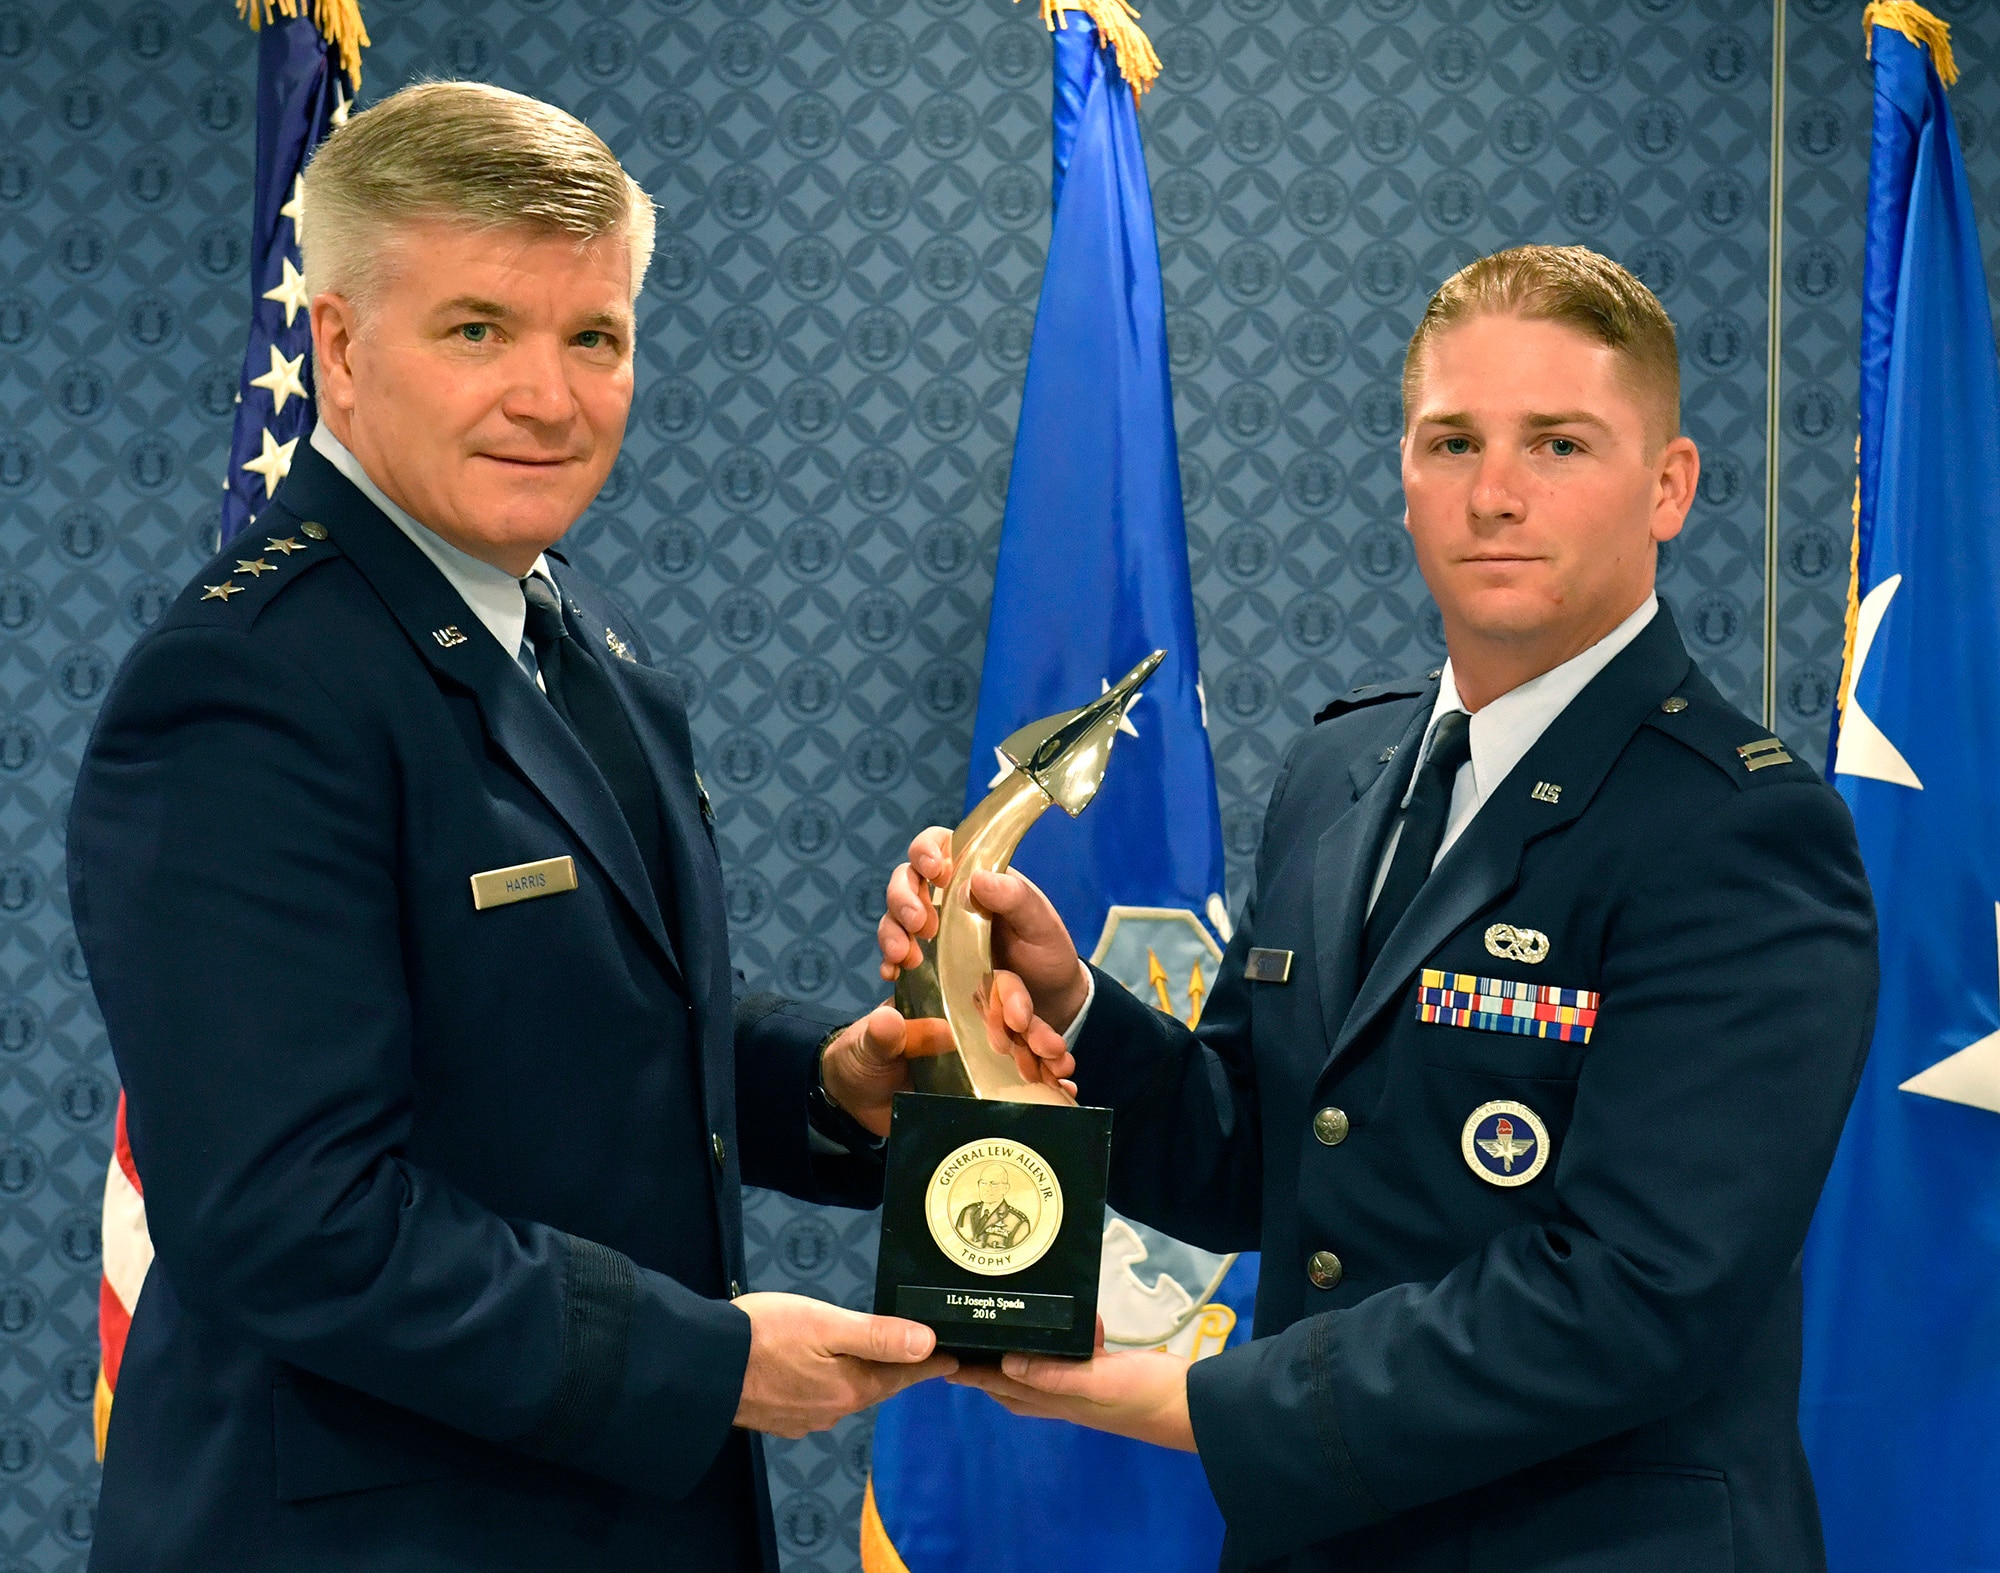 Lt. Gen. Jerry Harris, the deputy chief of staff for strategic plans, programs and requirements, presents Capt. Joseph Spada the Gen. Lew Allen Jr. Trophy for 2016 during a ceremony at the Pentagon, April 21, 2017. (U.S. Air Force photo/Wayne A. Clark)